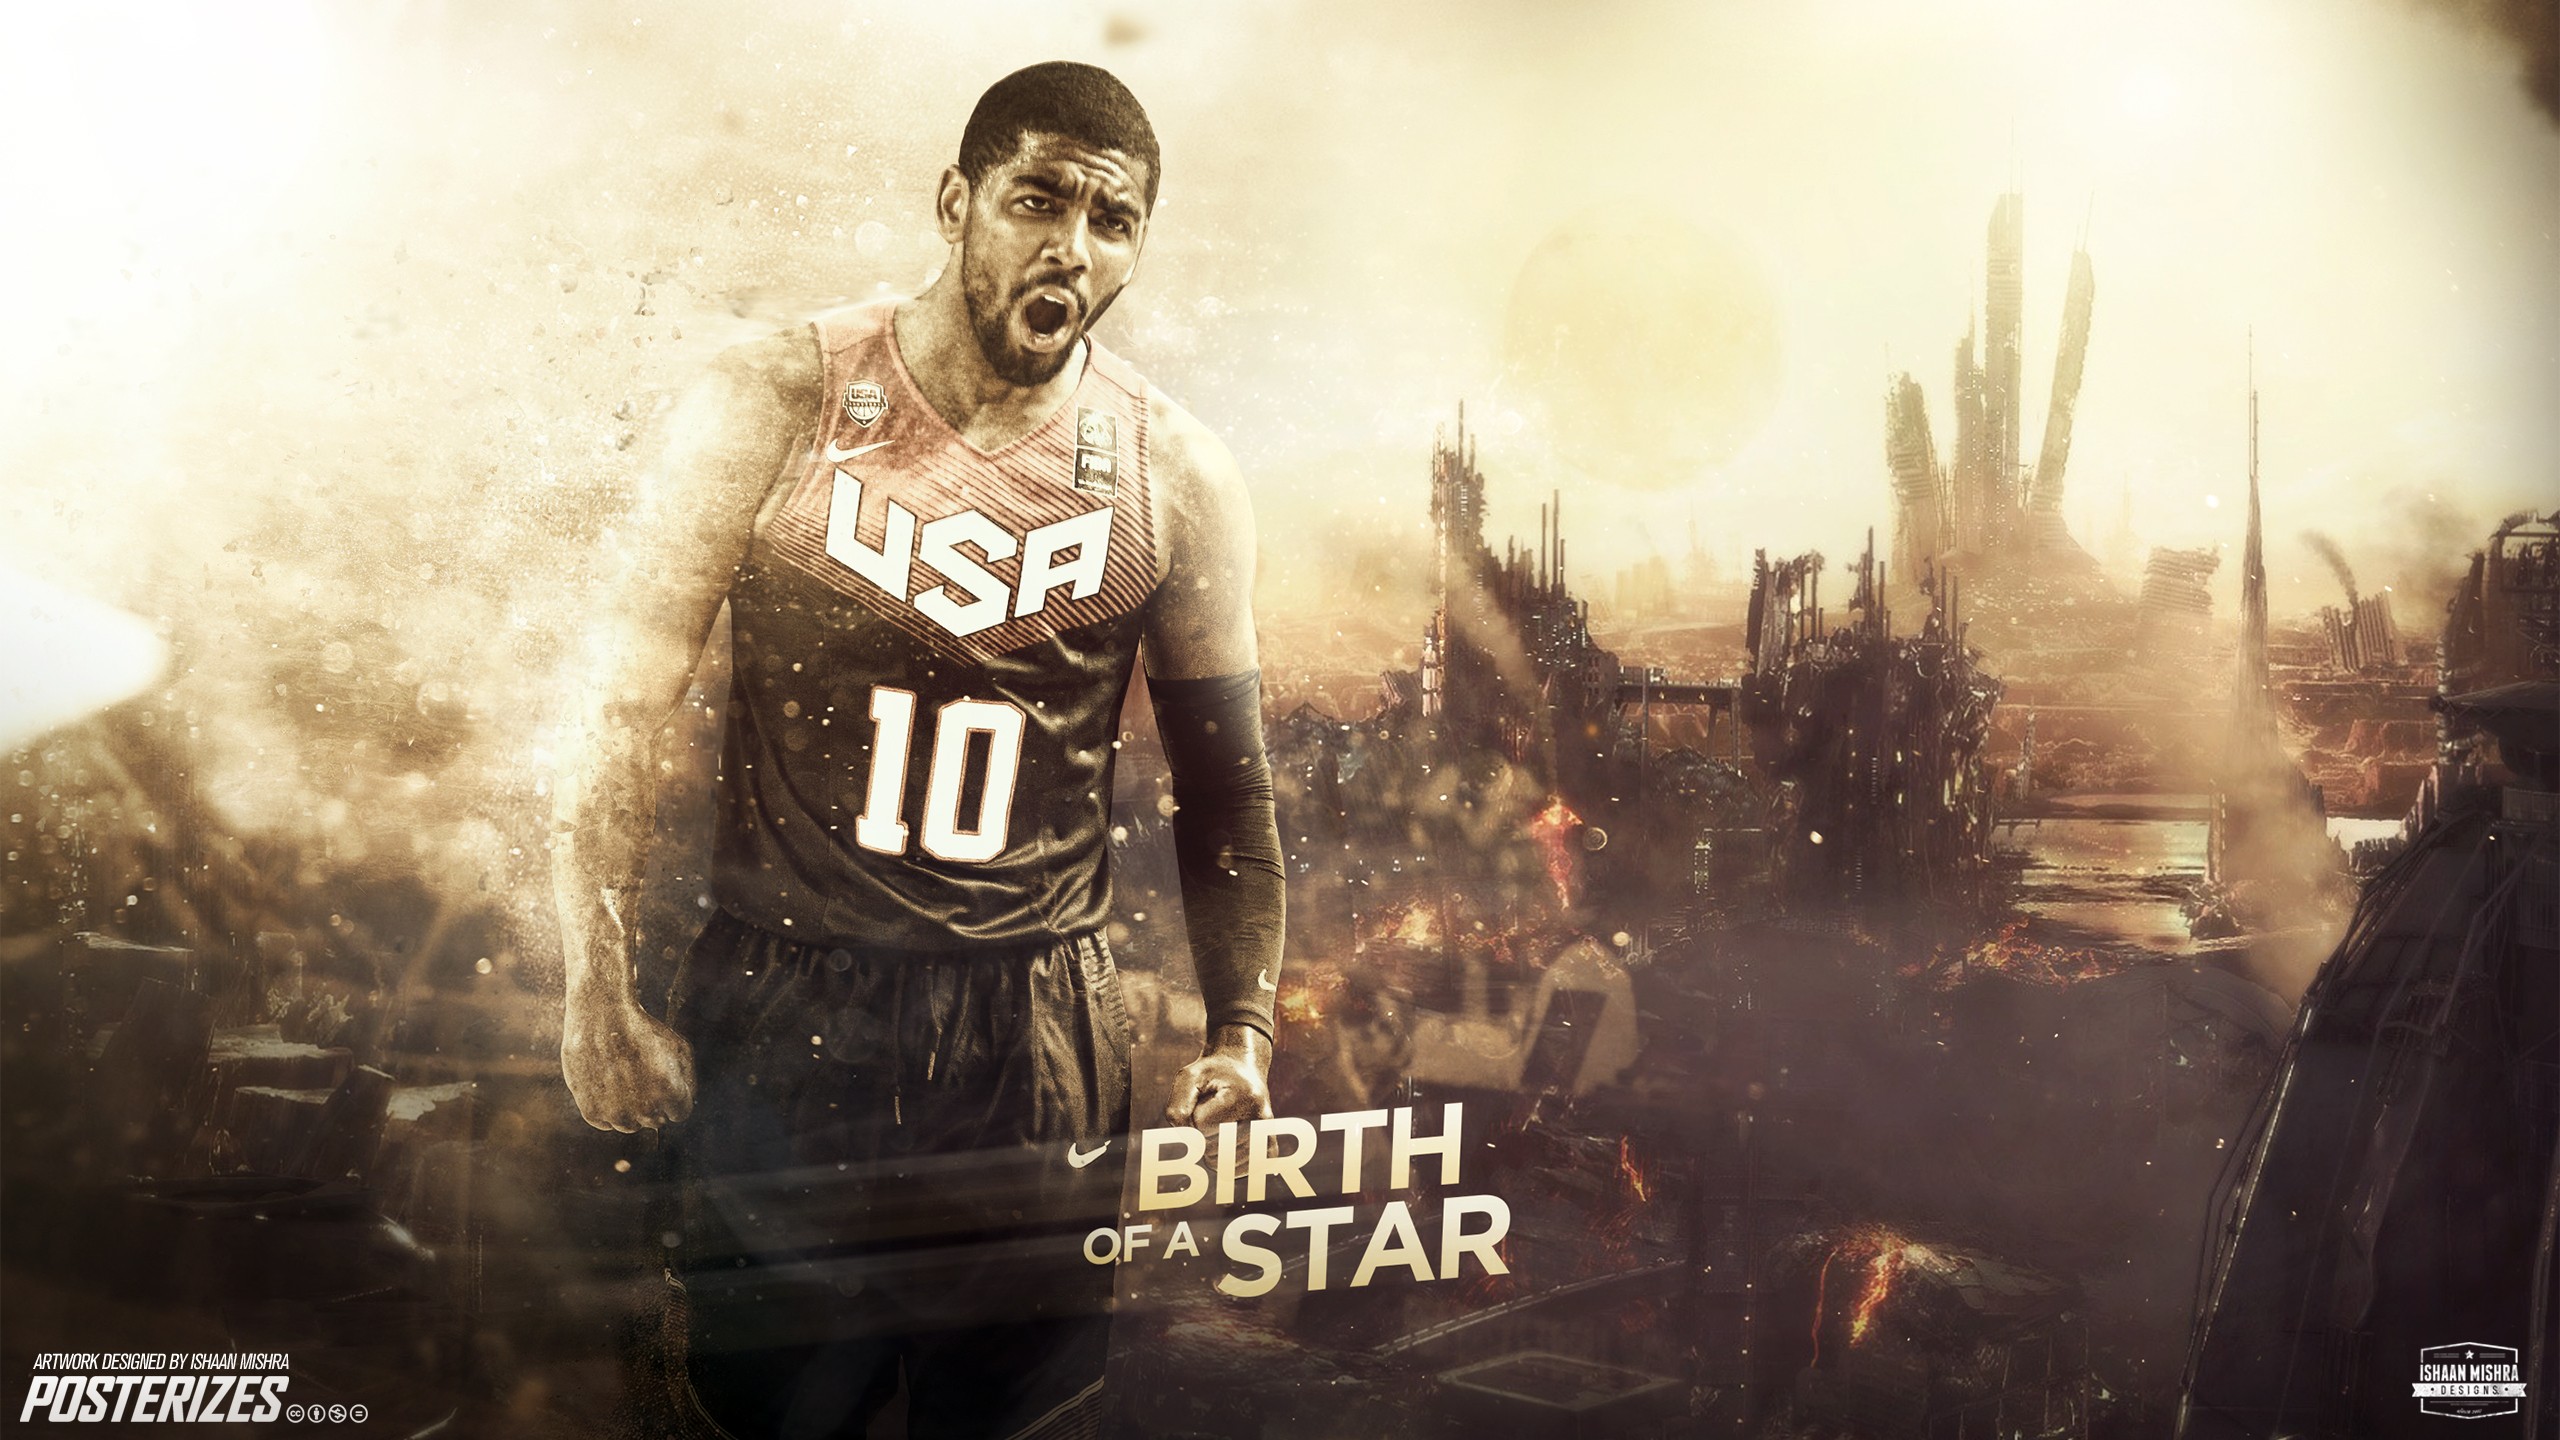 People 2560x1440 men basketball digital art numbers open mouth Kyrie Irving